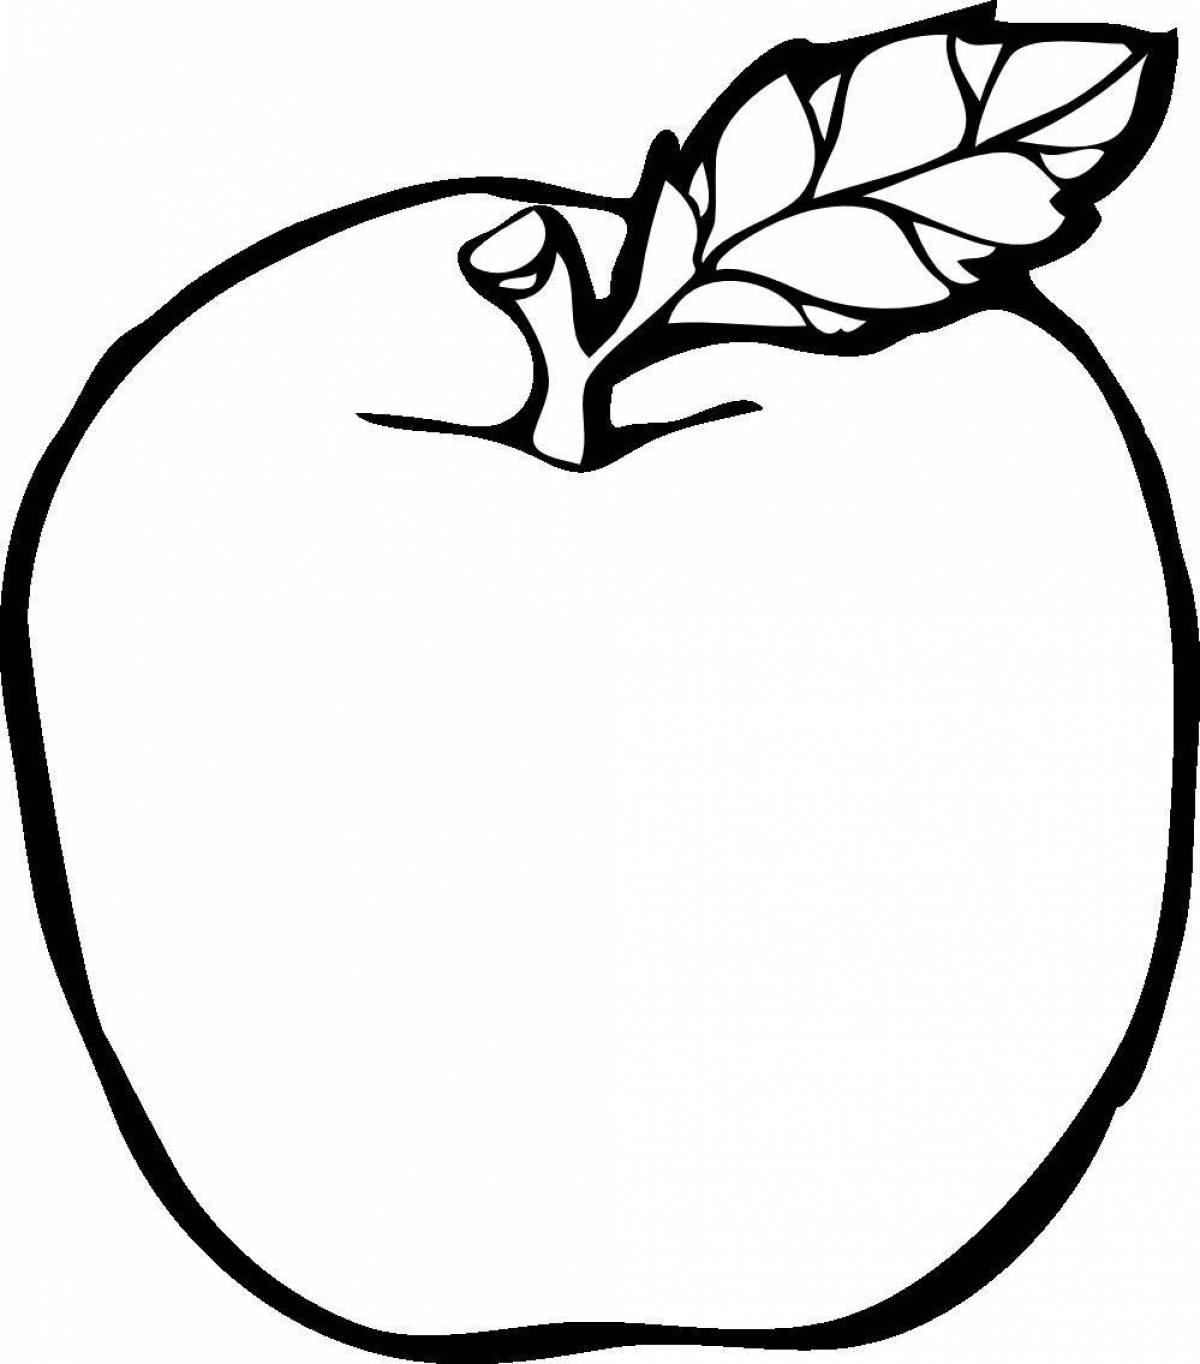 Color-frenzy apple coloring page for kids